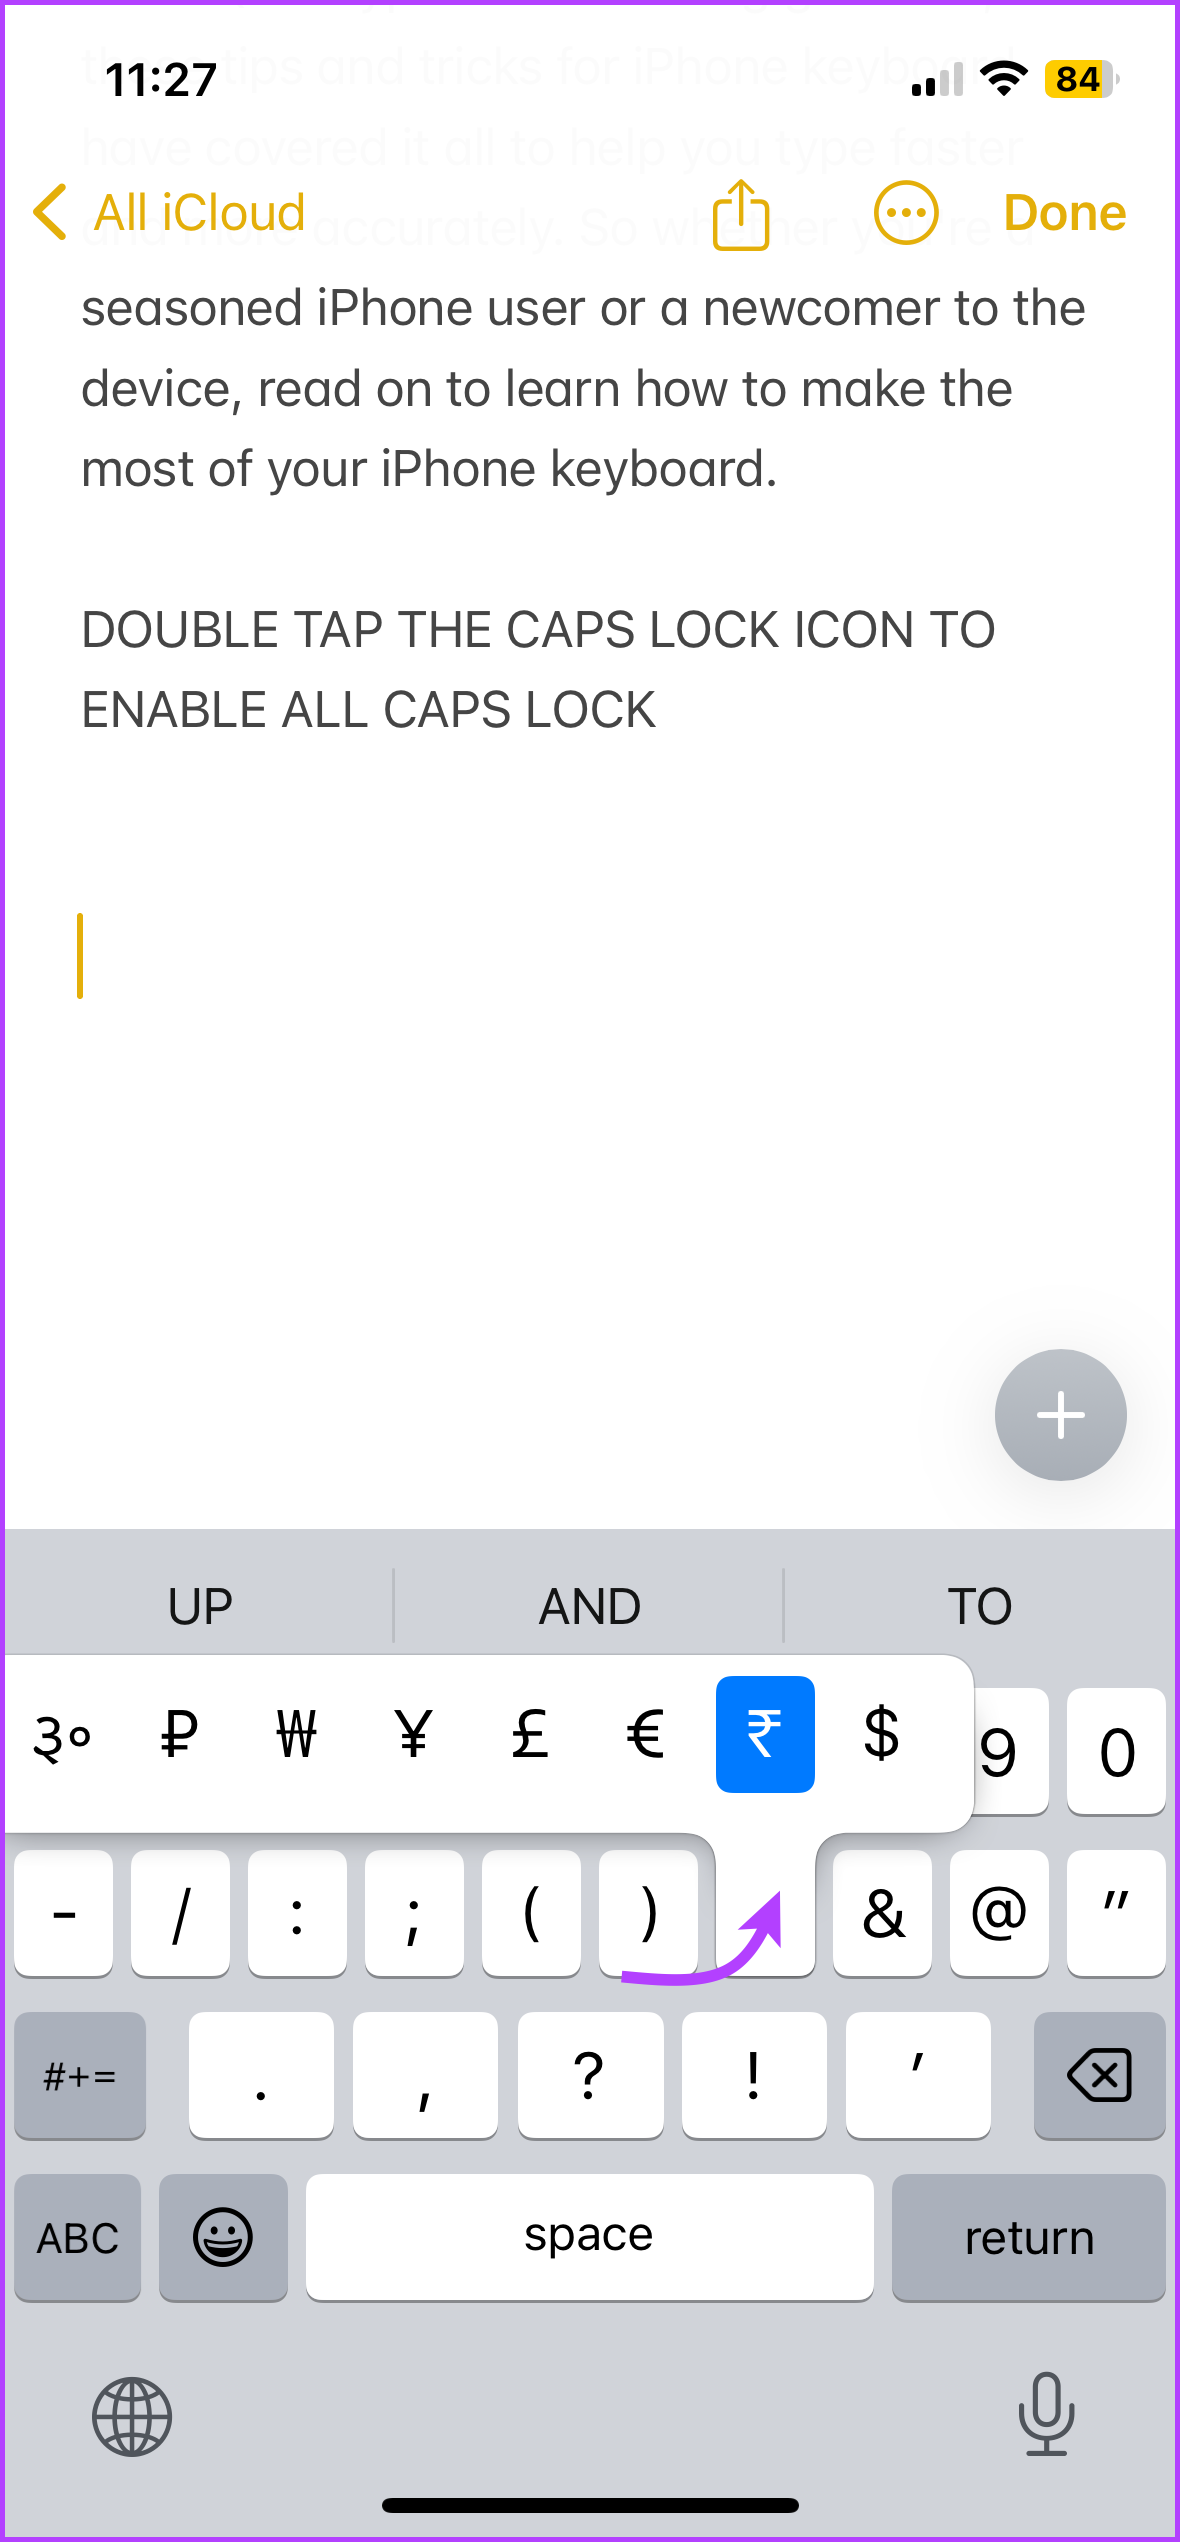 Tap and hold currency sign for other currency symbols